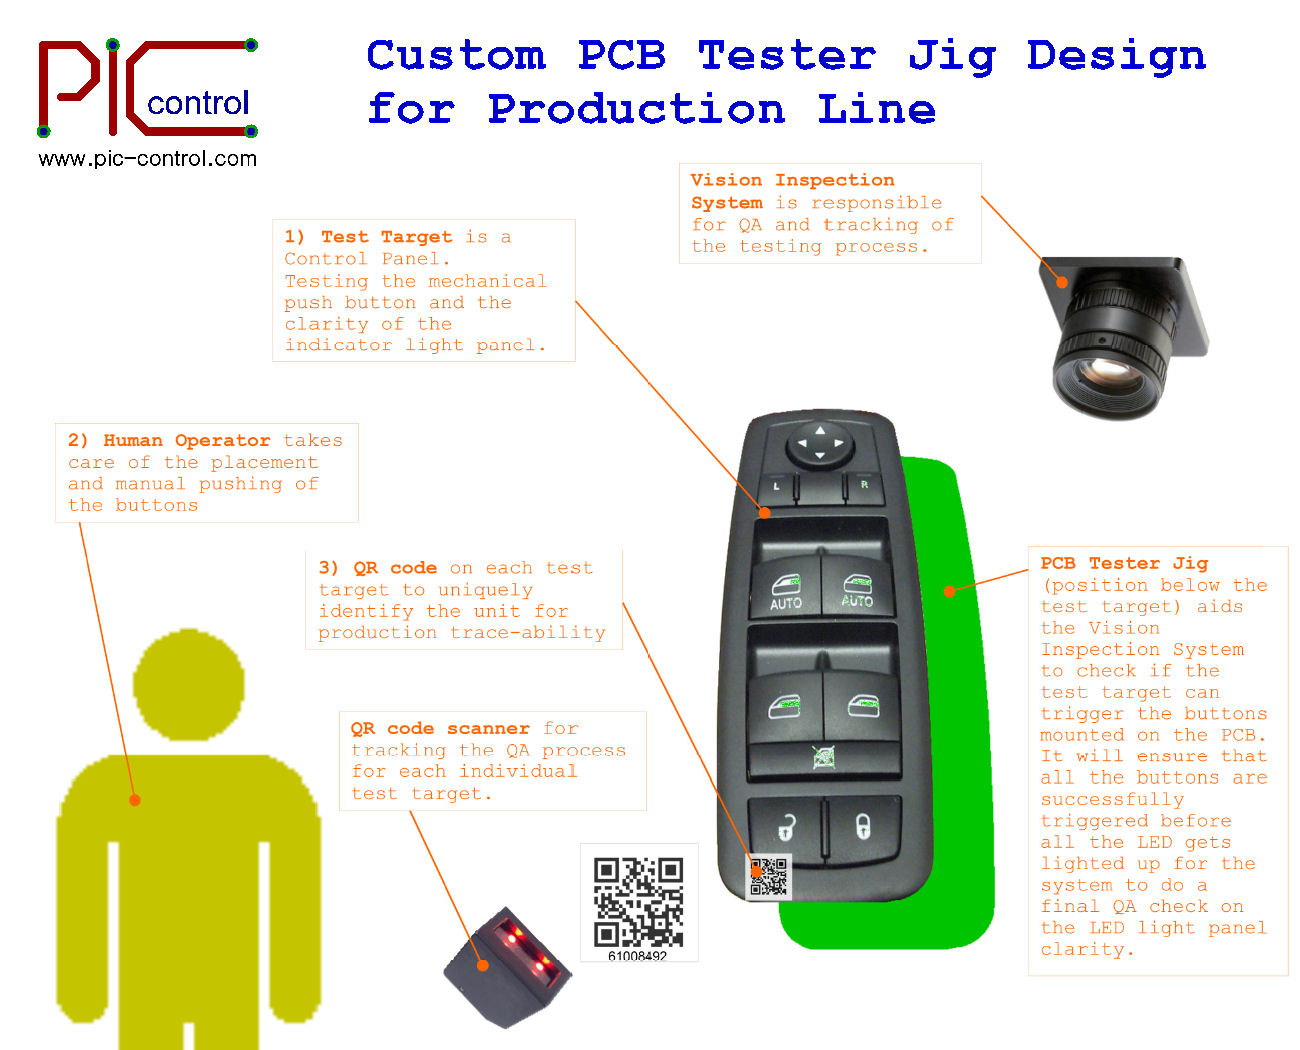 Customise Electronic PCB Tester Jig for efficient production of your products